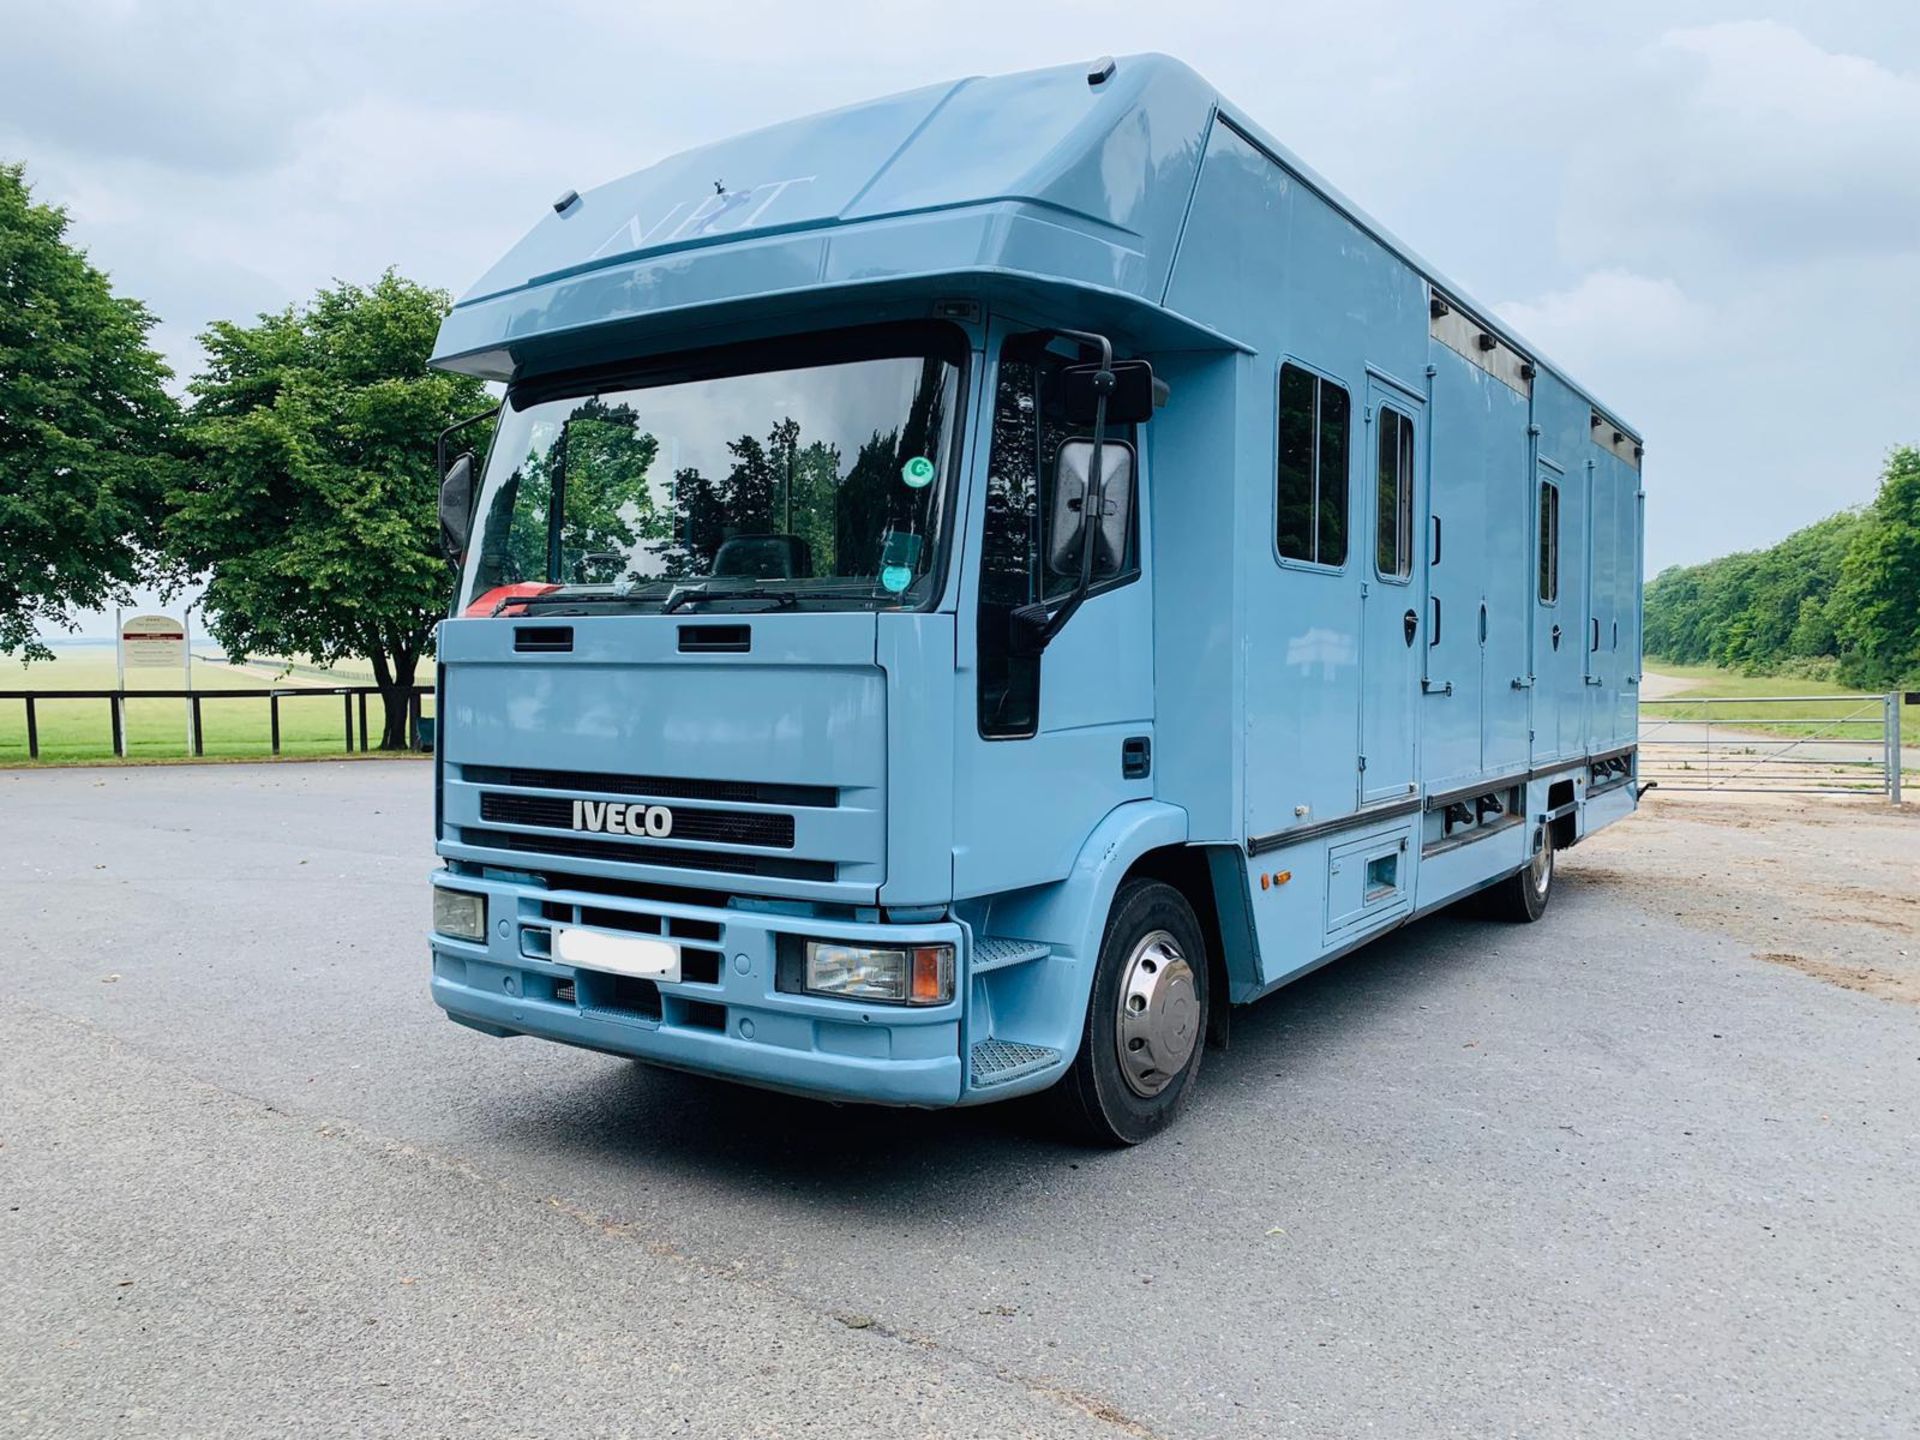 (RESERVE MET) Iveco 110E18 'OLYMPIC' Horsebox 2001 - 6 Speed - Fits 4/6 Forward Facing Horses - Image 2 of 24